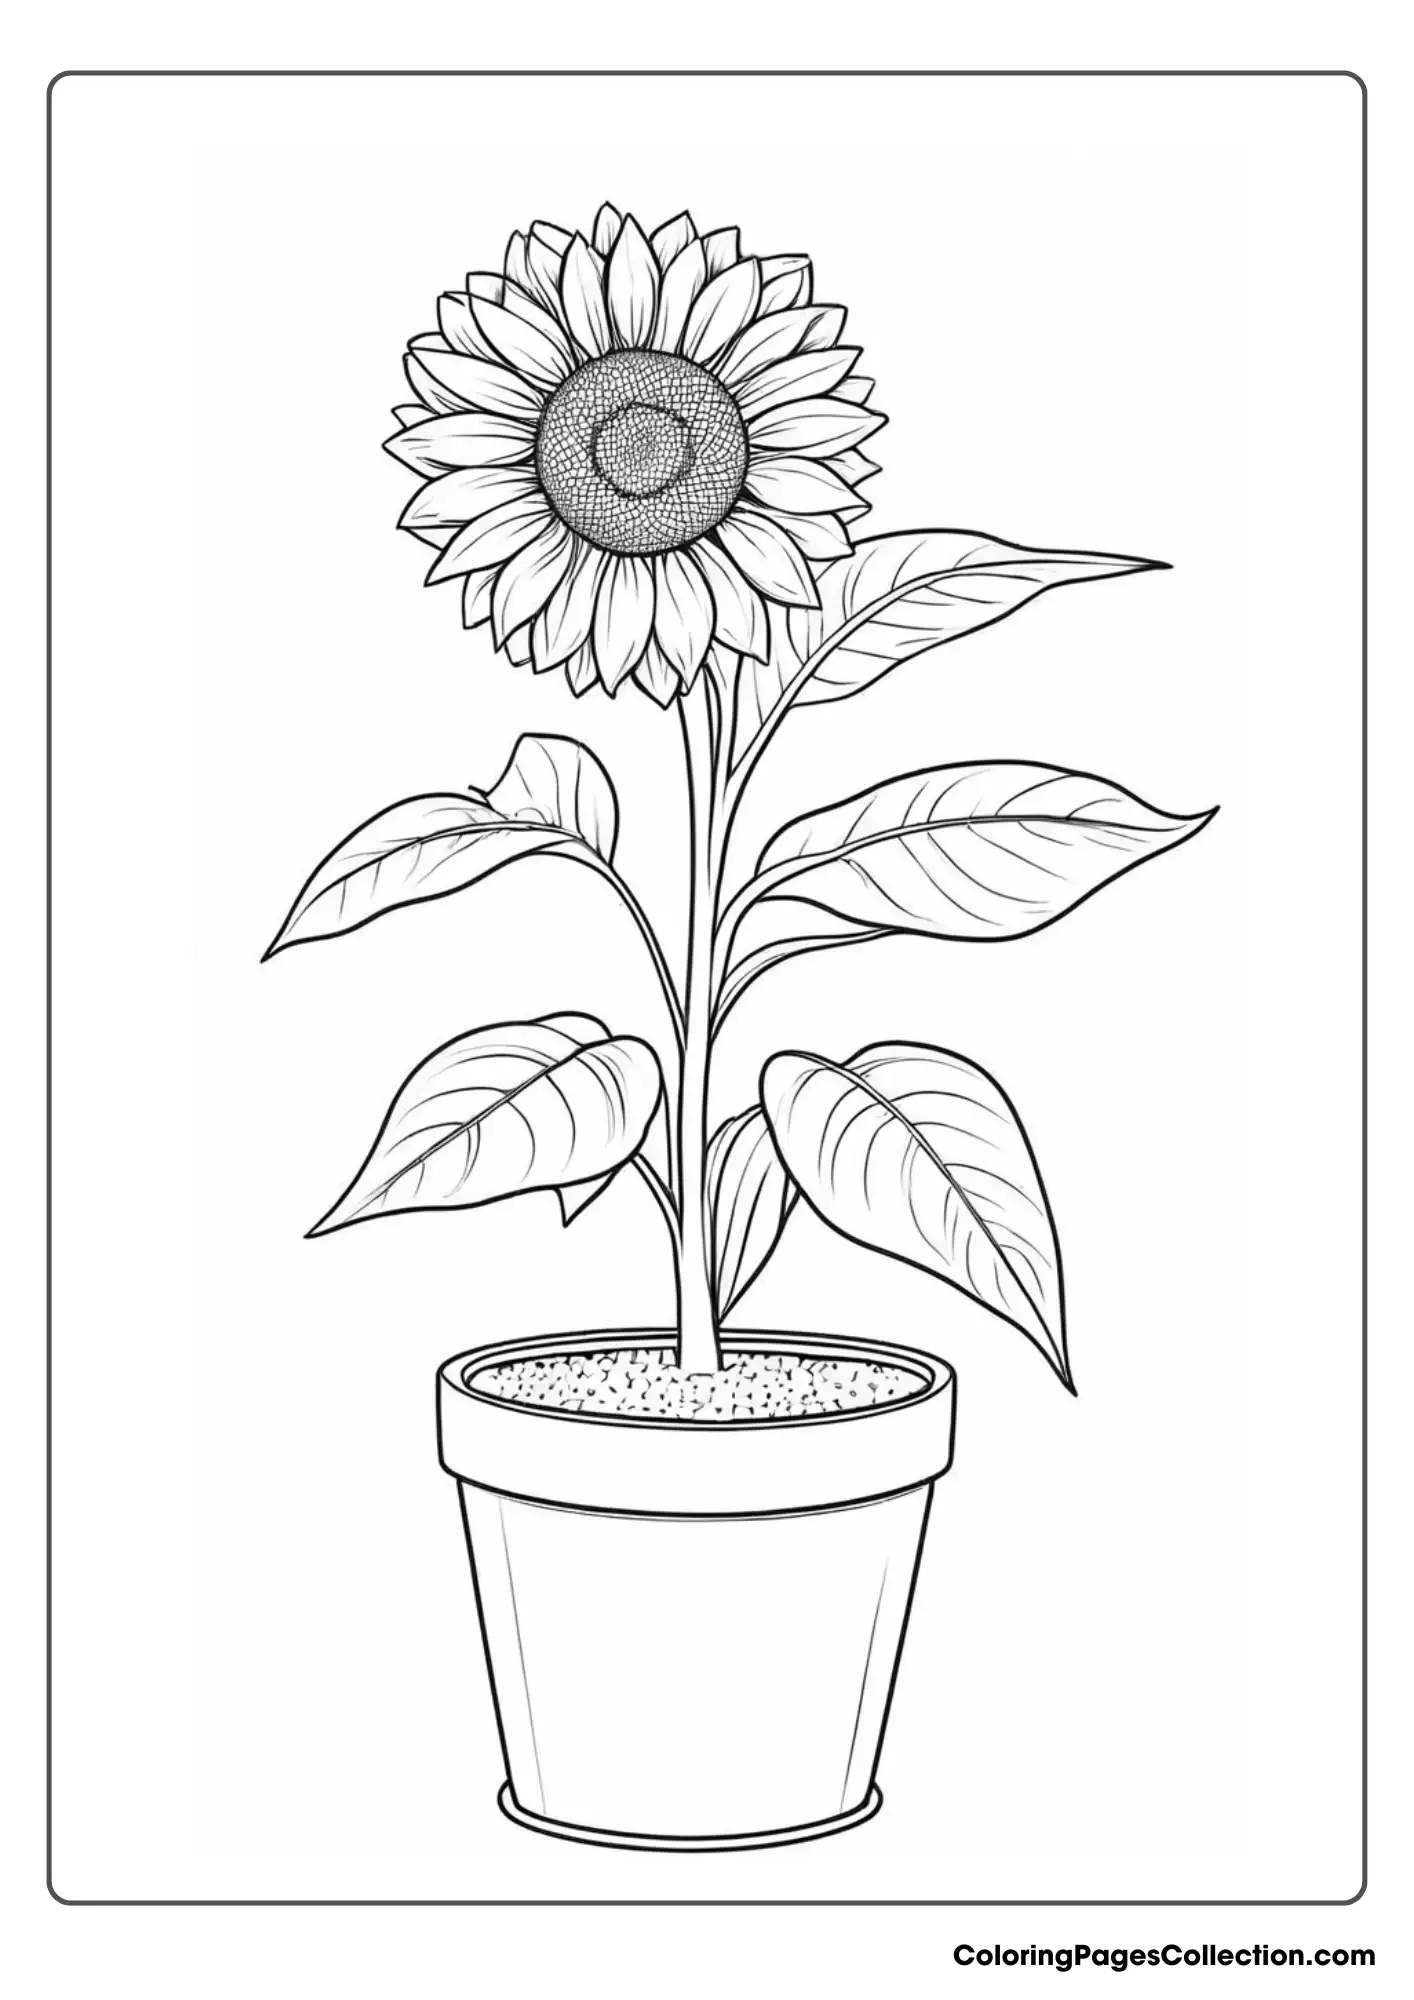 A Sunflower In A Pot Coloring Page